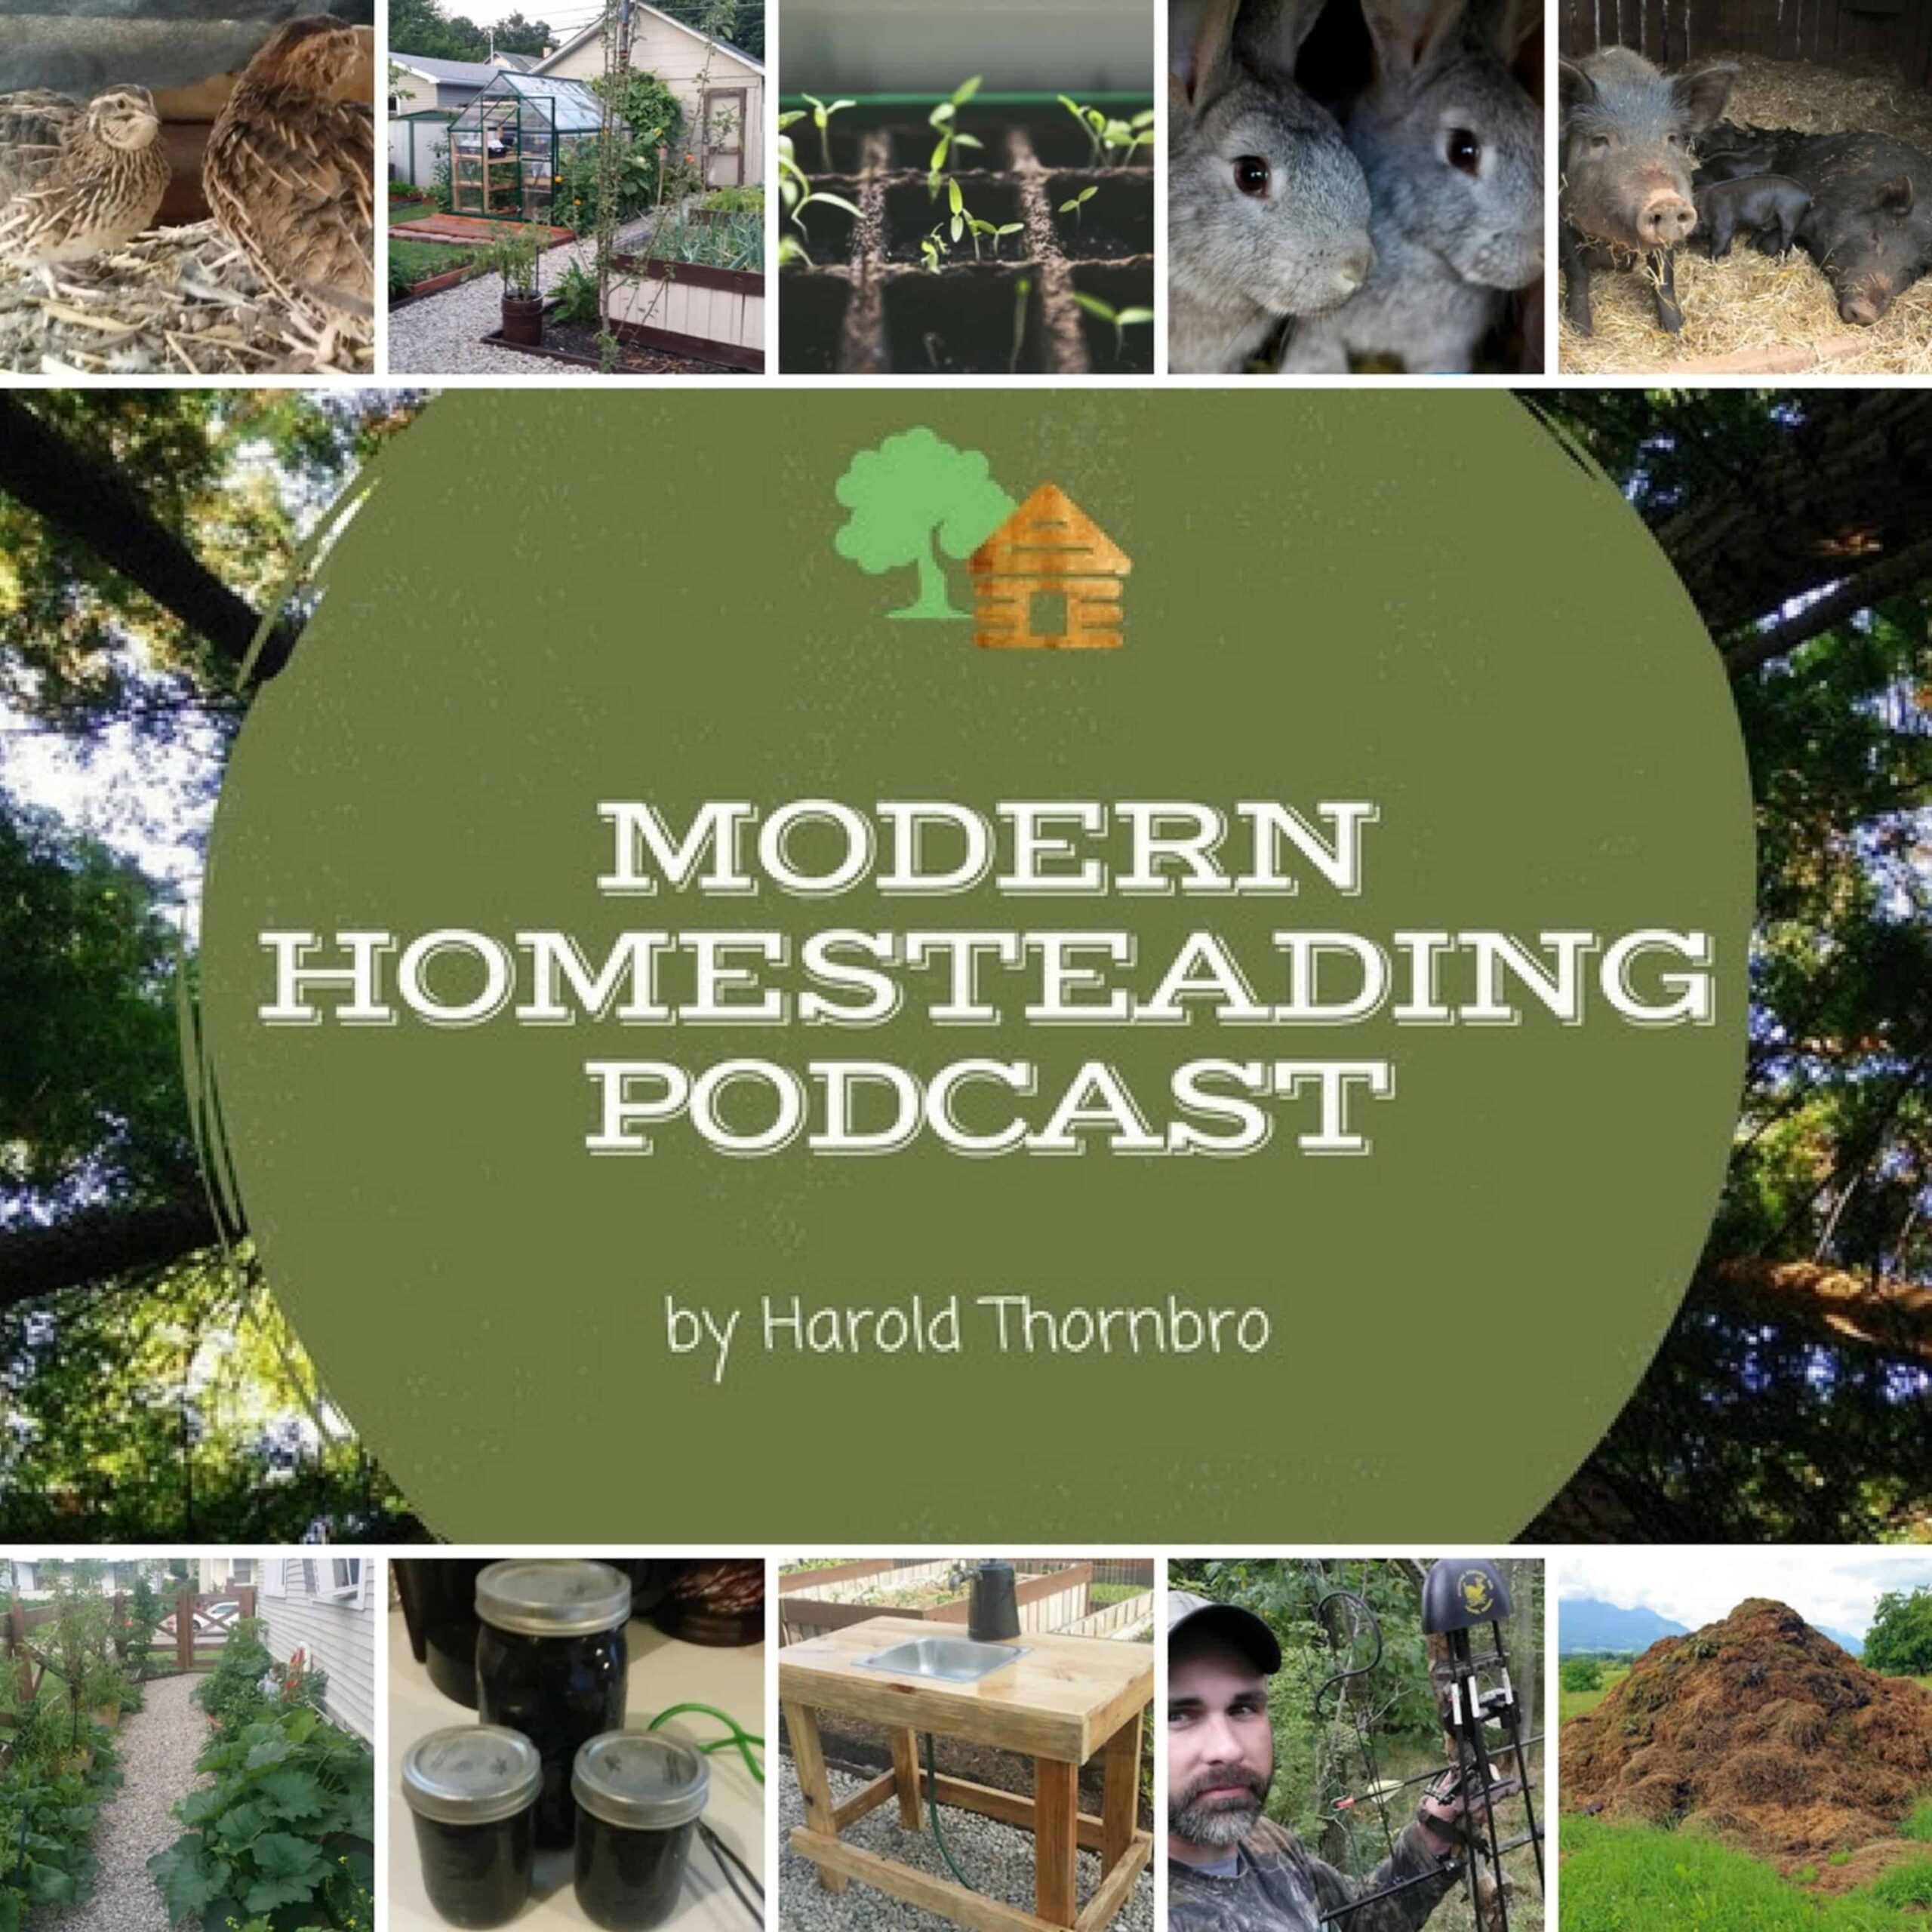 Homesteading By The Guinea Fowl Principle With Guests Sean and Rachel
Reeves